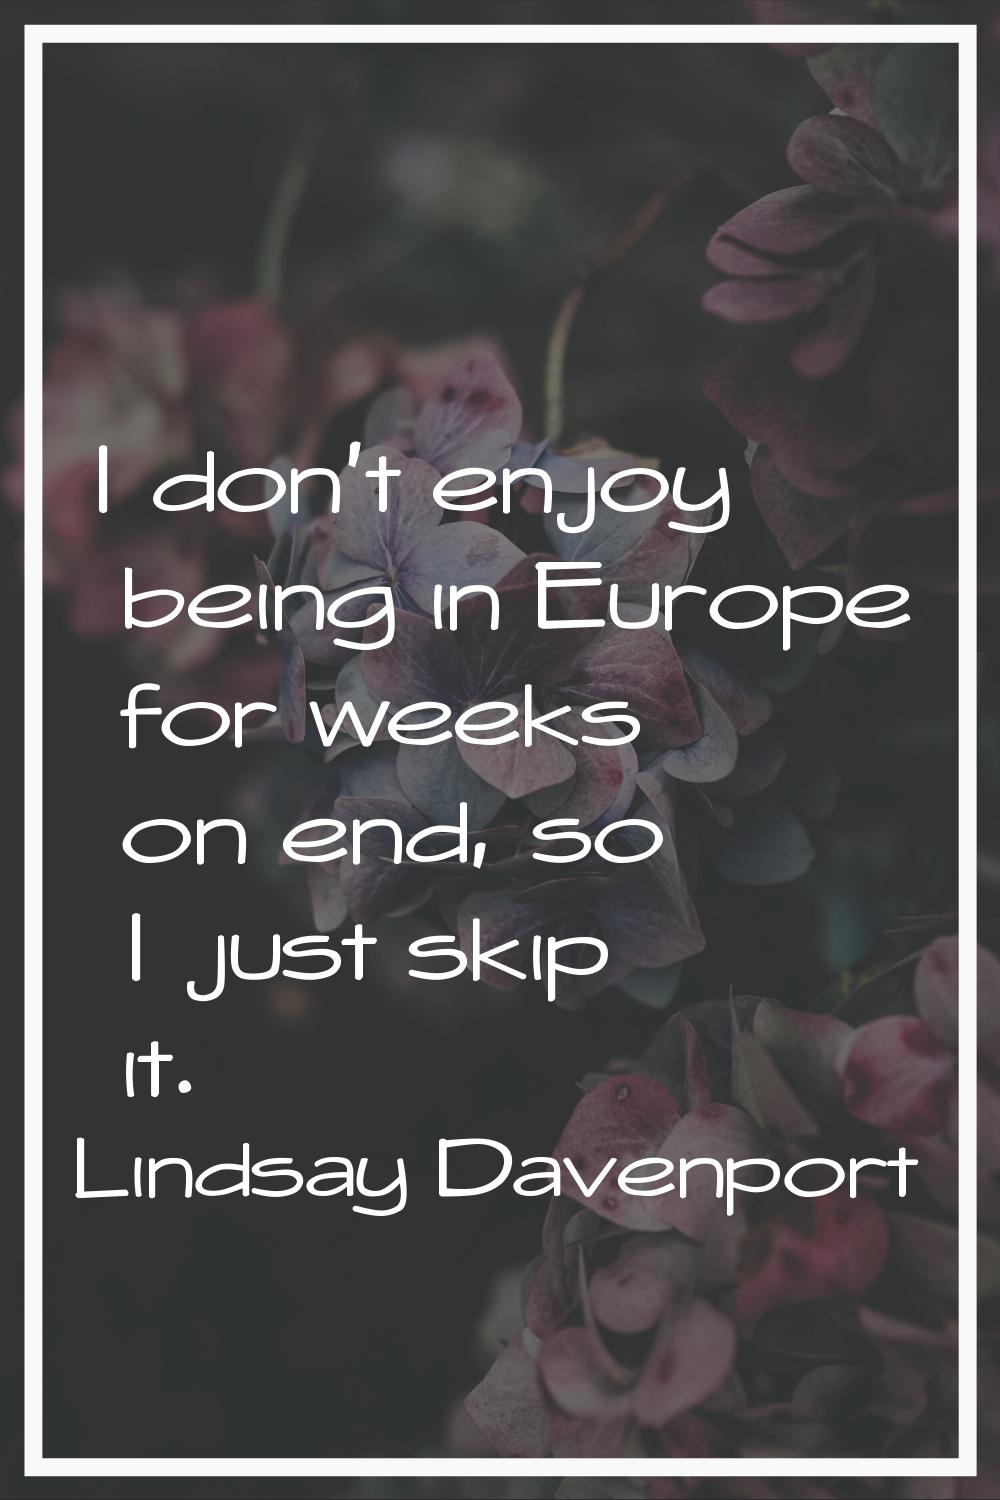 I don't enjoy being in Europe for weeks on end, so I just skip it.